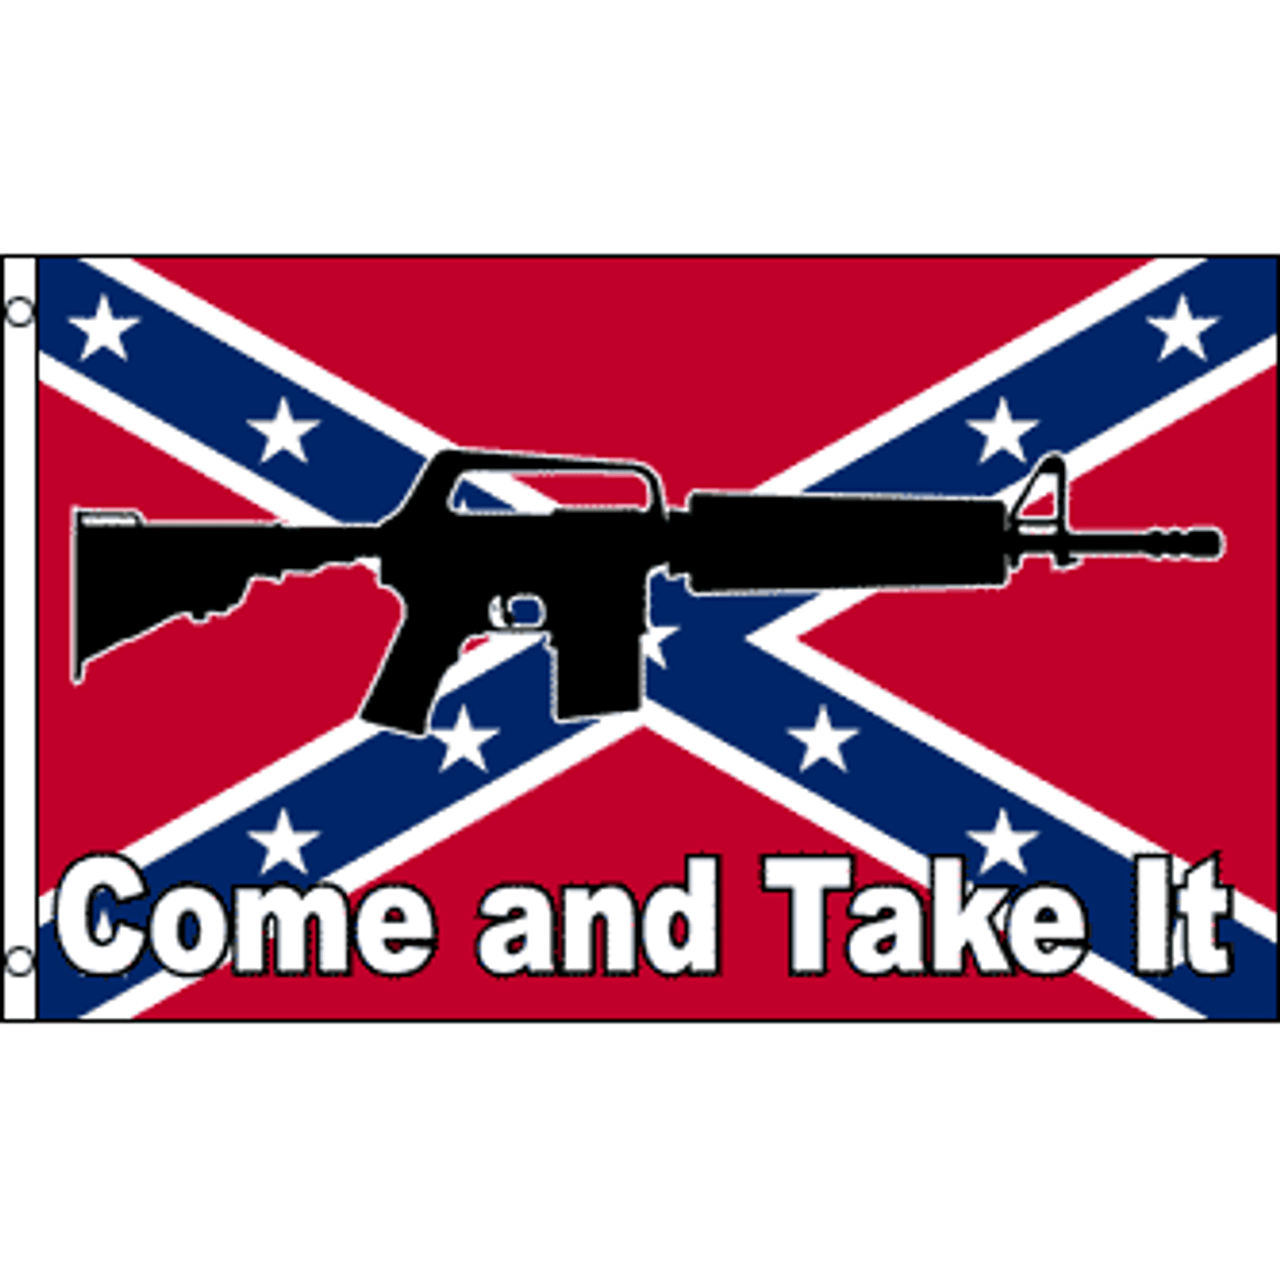 Rebel Come and Take it M4 Rifle Flags – Printed Polyester - I AmEricas Flags